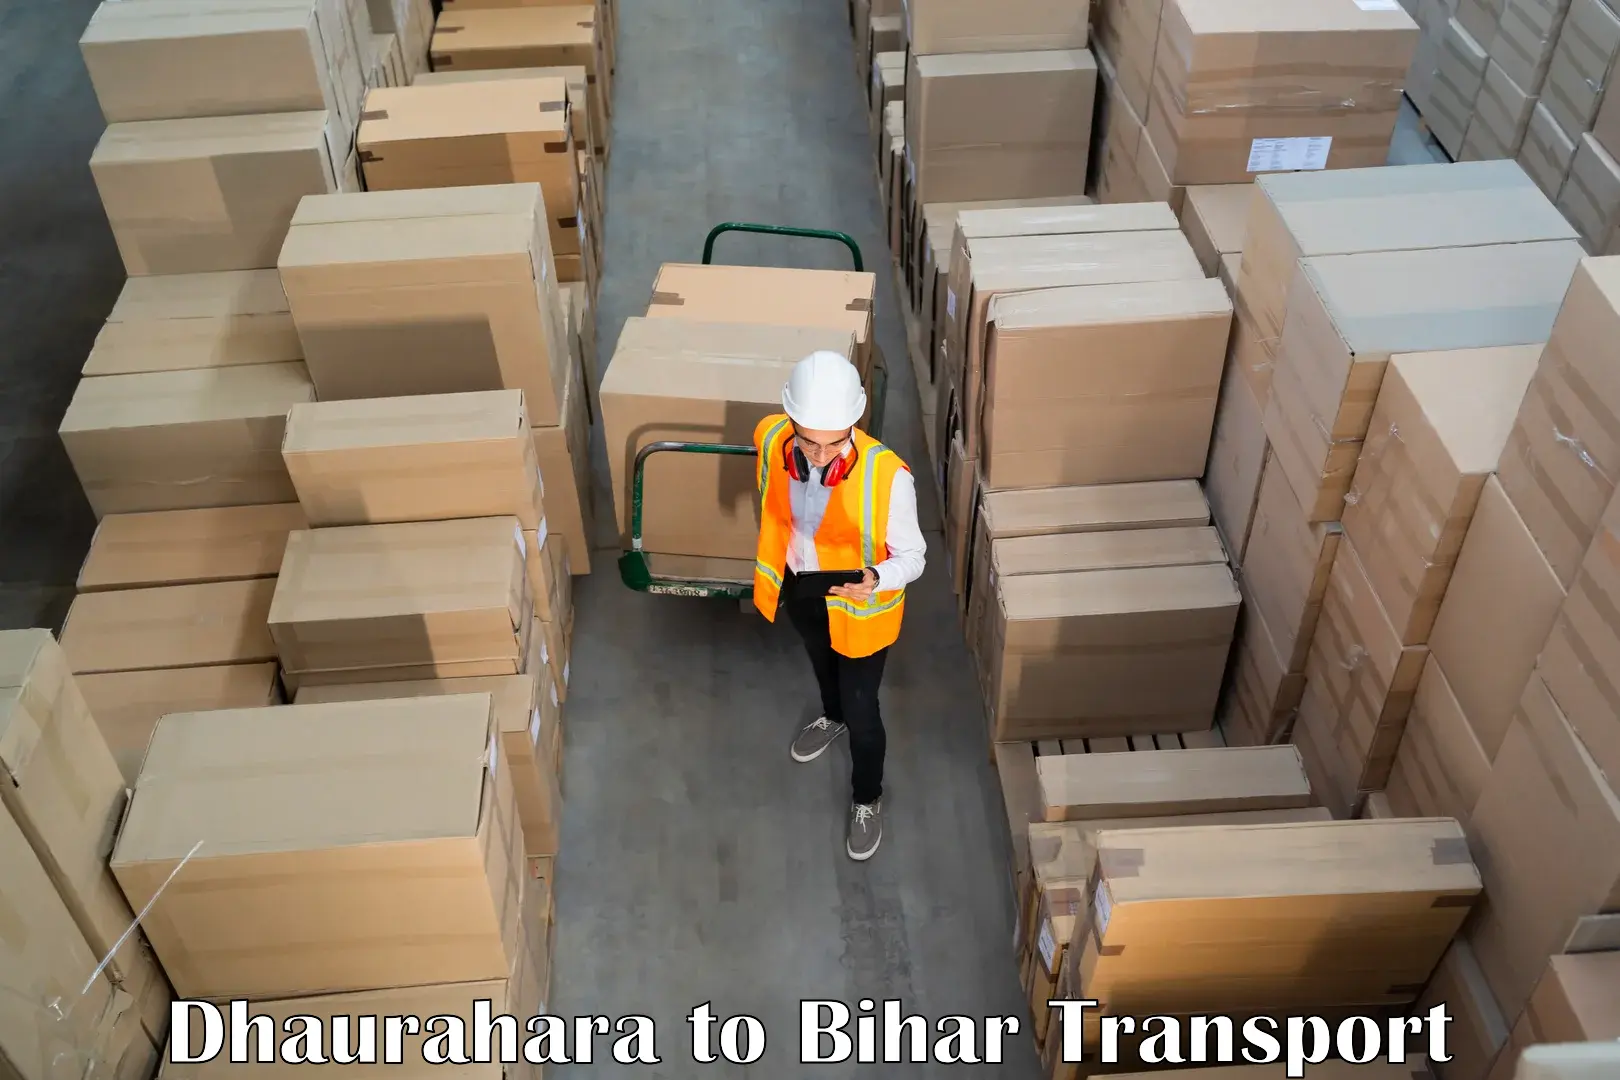 Air freight transport services Dhaurahara to Sheohar